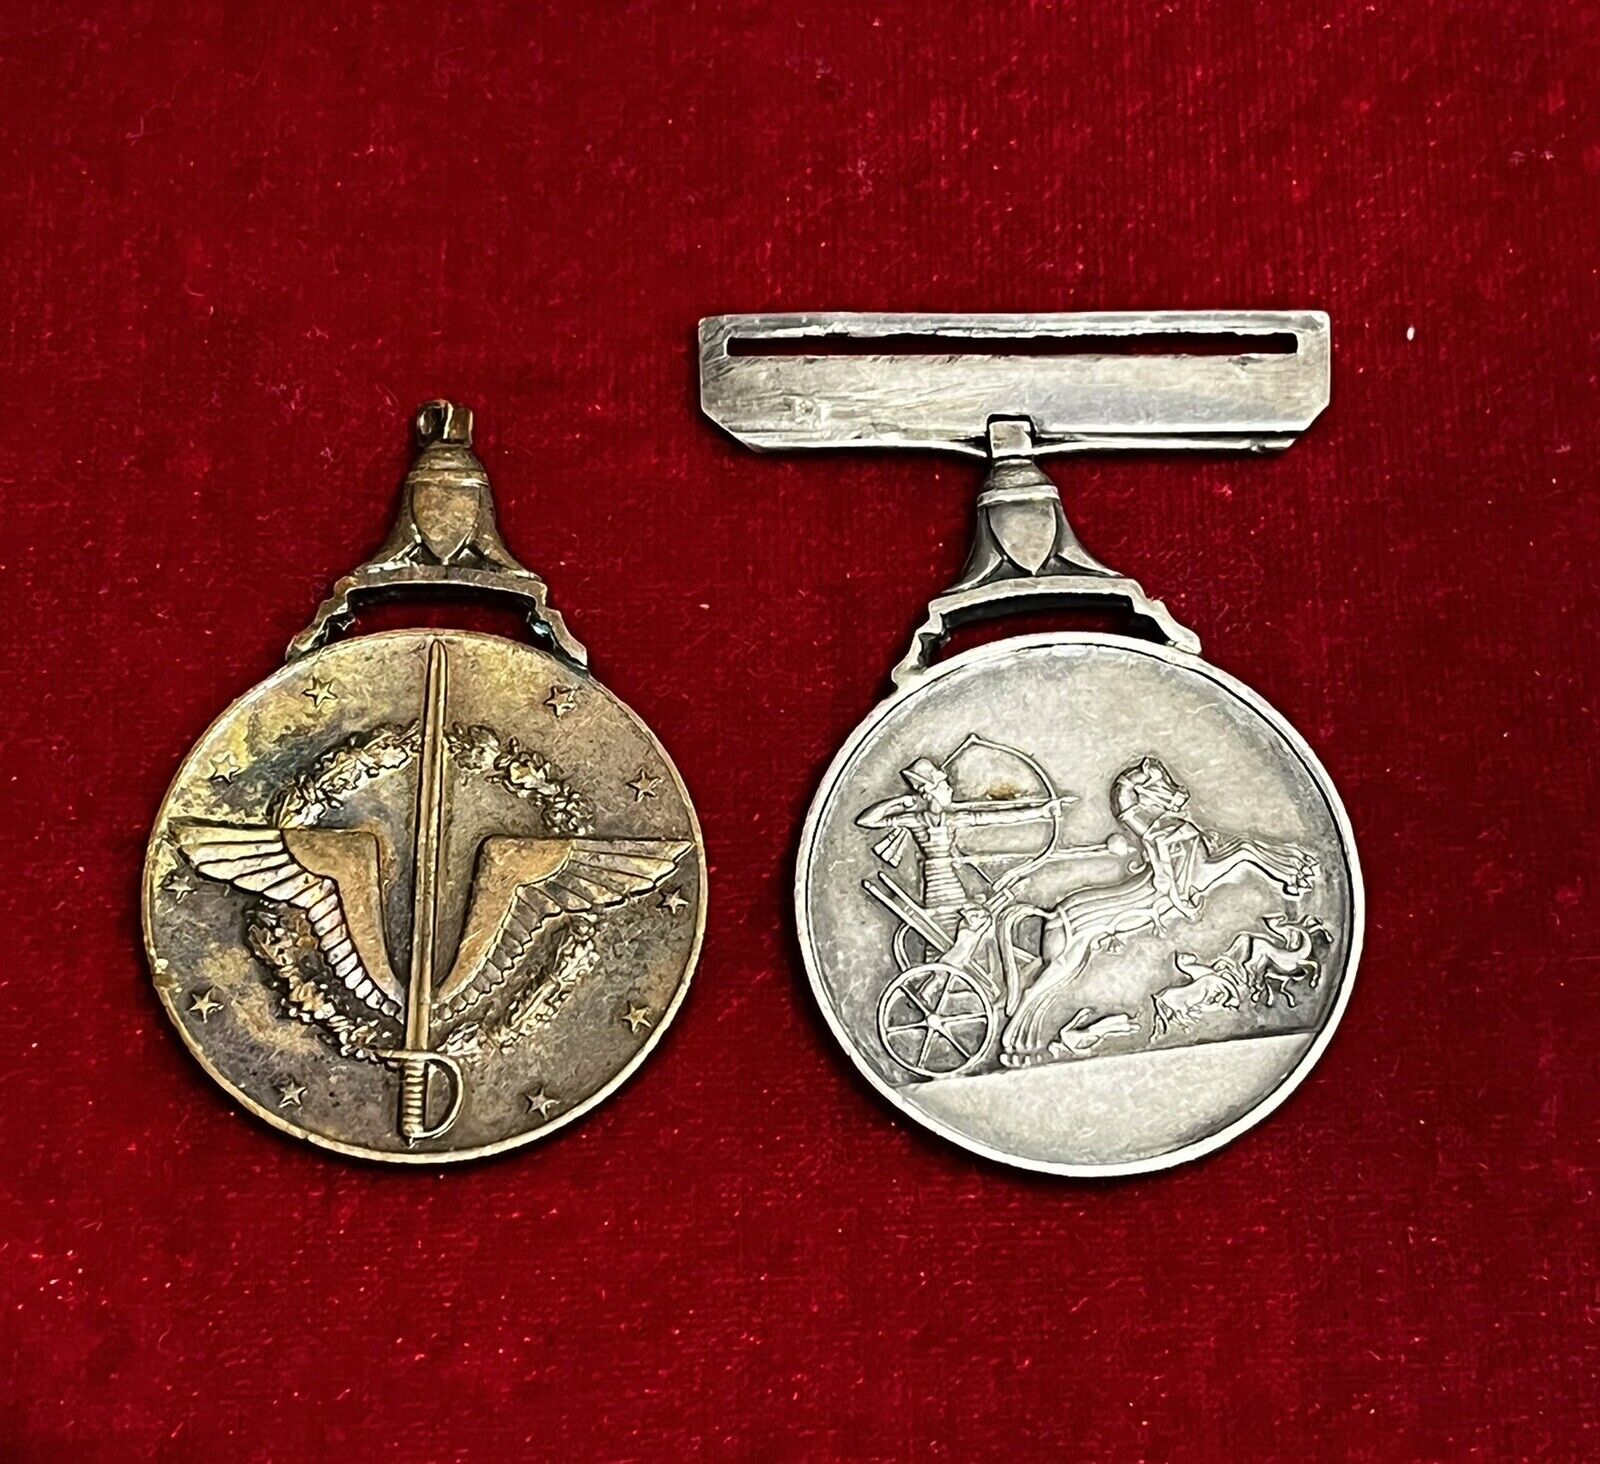 EGYPT 1959 Military Medal of Courage Silver &1953 MILITARY ORDER OF THE MERIT